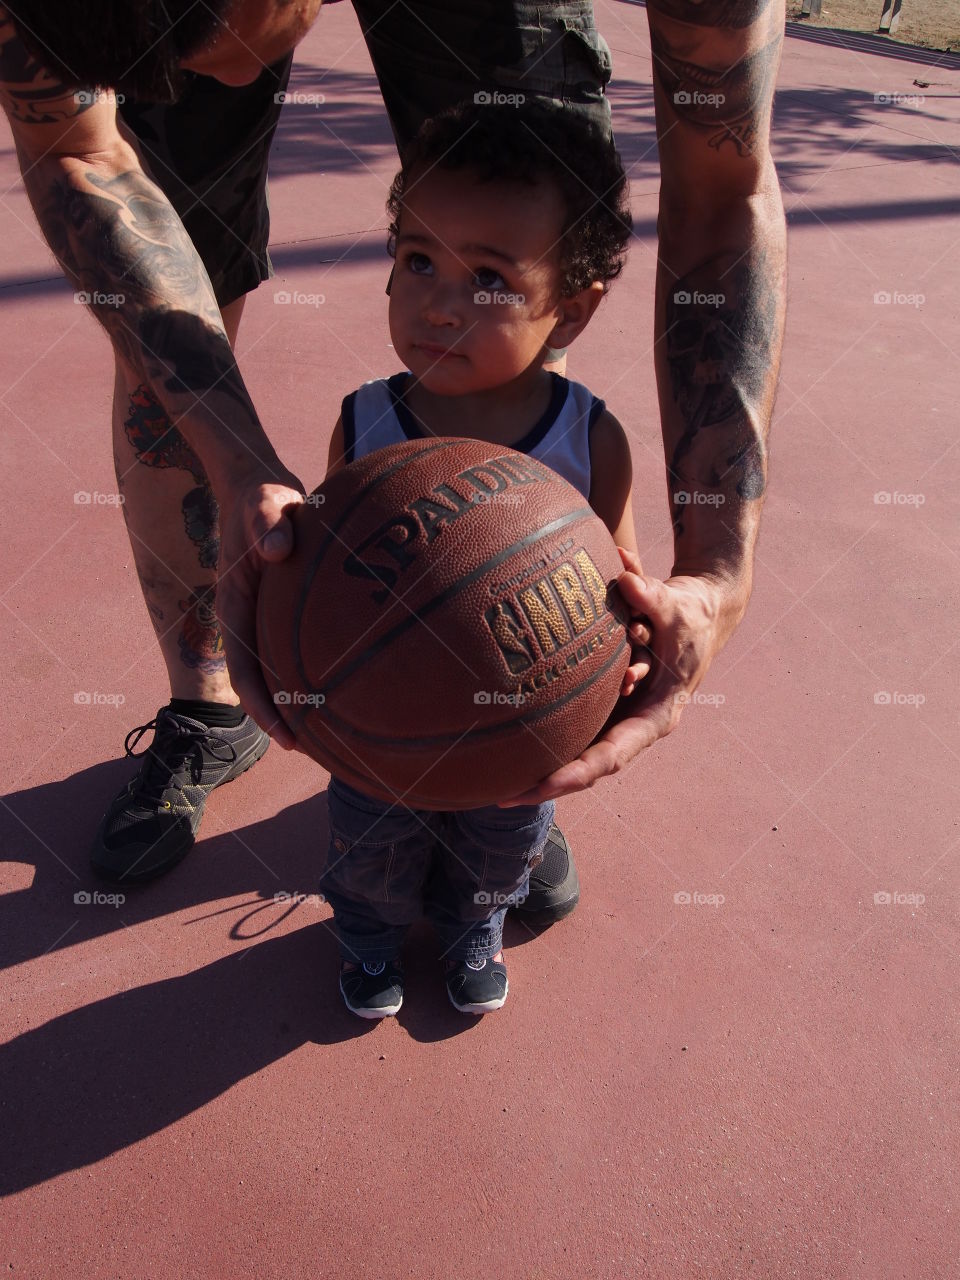 Father and son with basketball in hand